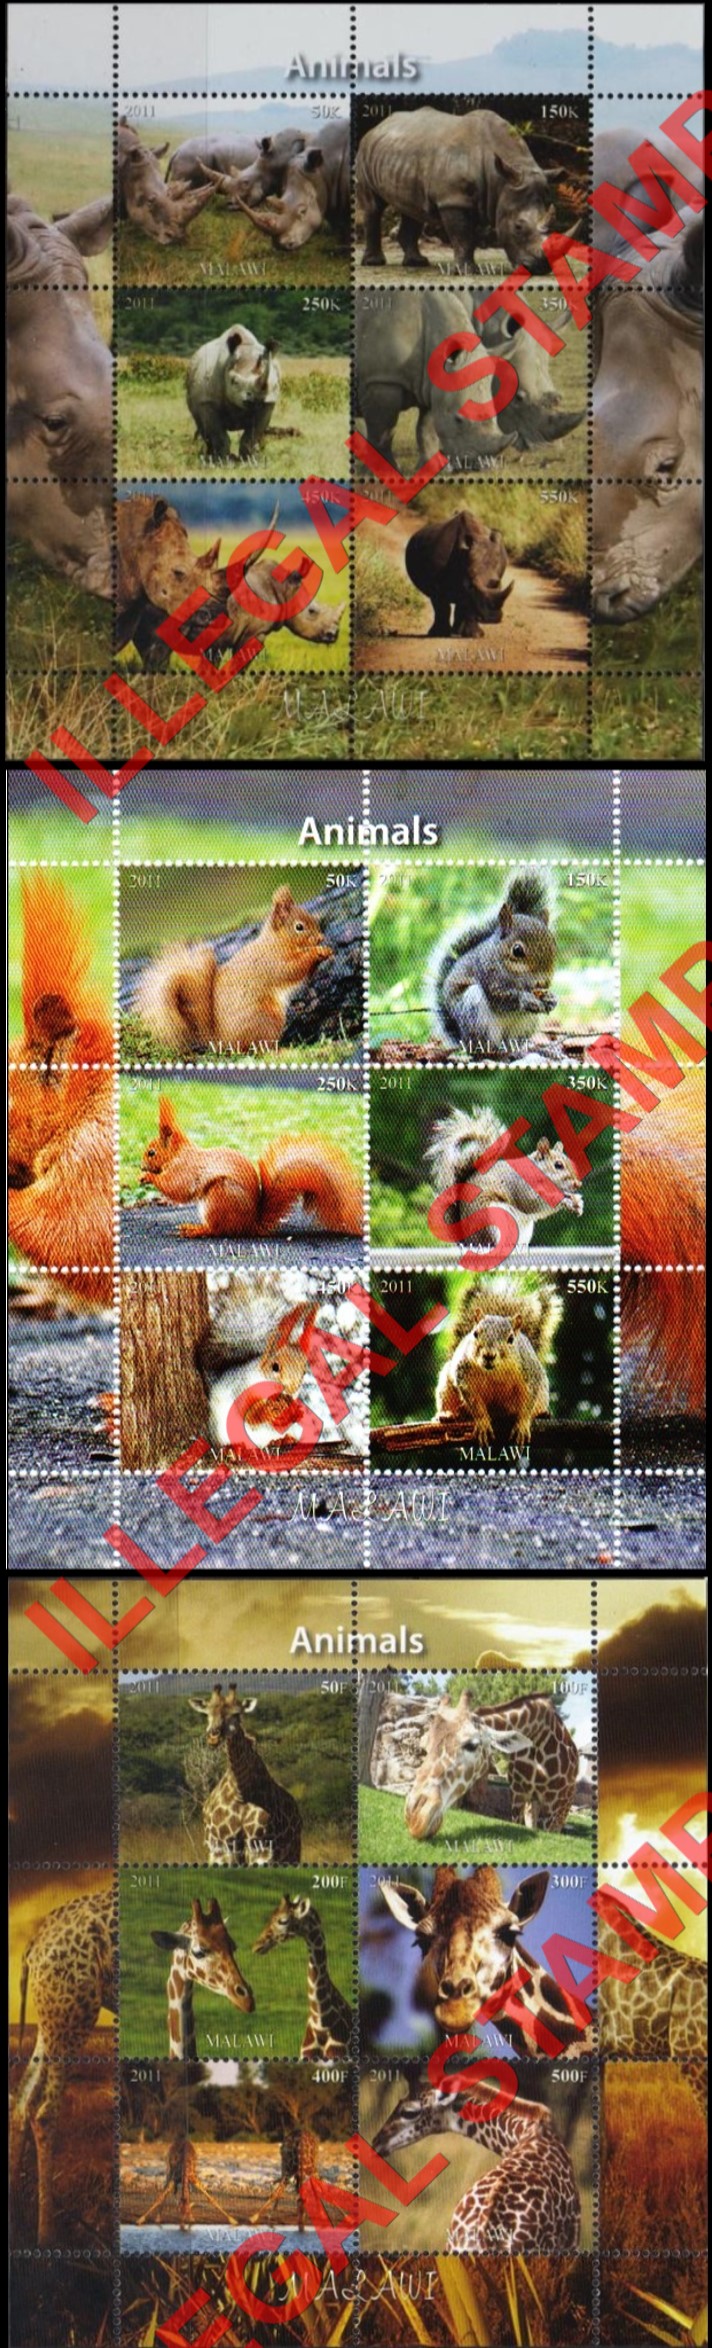 Malawi 2011 Animals Illegal Stamp Souvenir Sheets of 6 (Part 5)